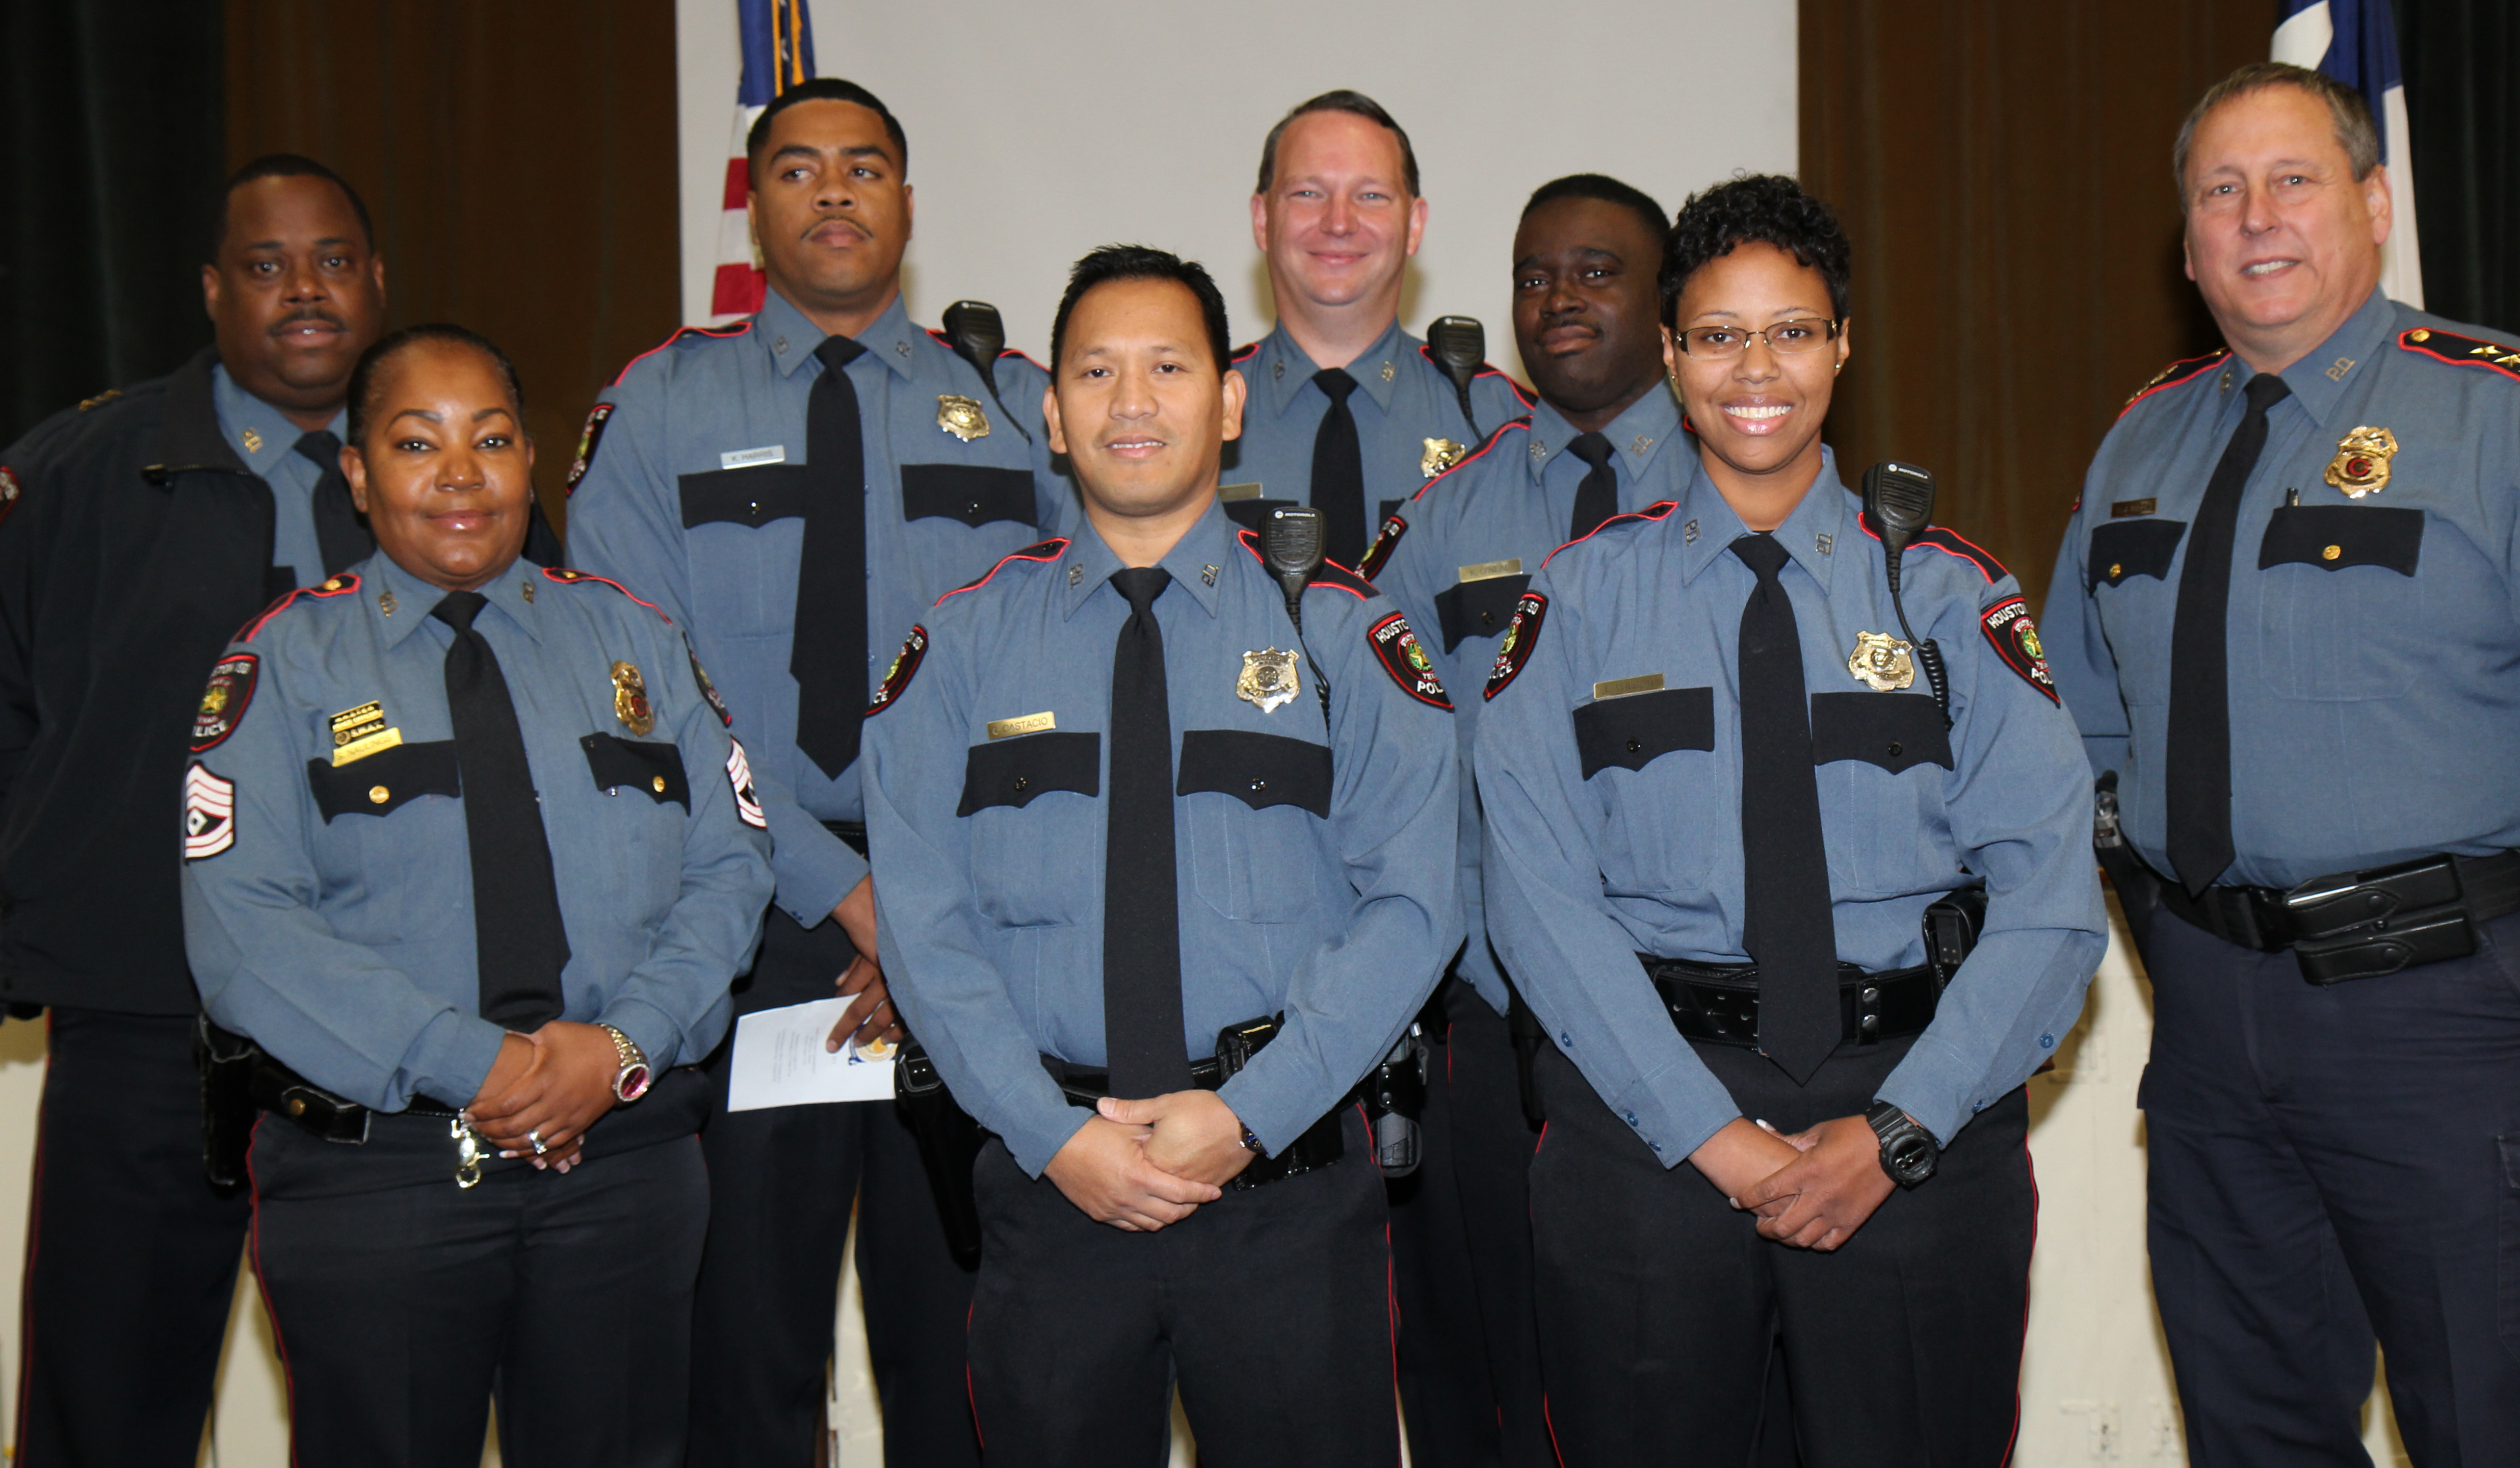 HISD Police Department welcomes five new officers, promotes sergeant in